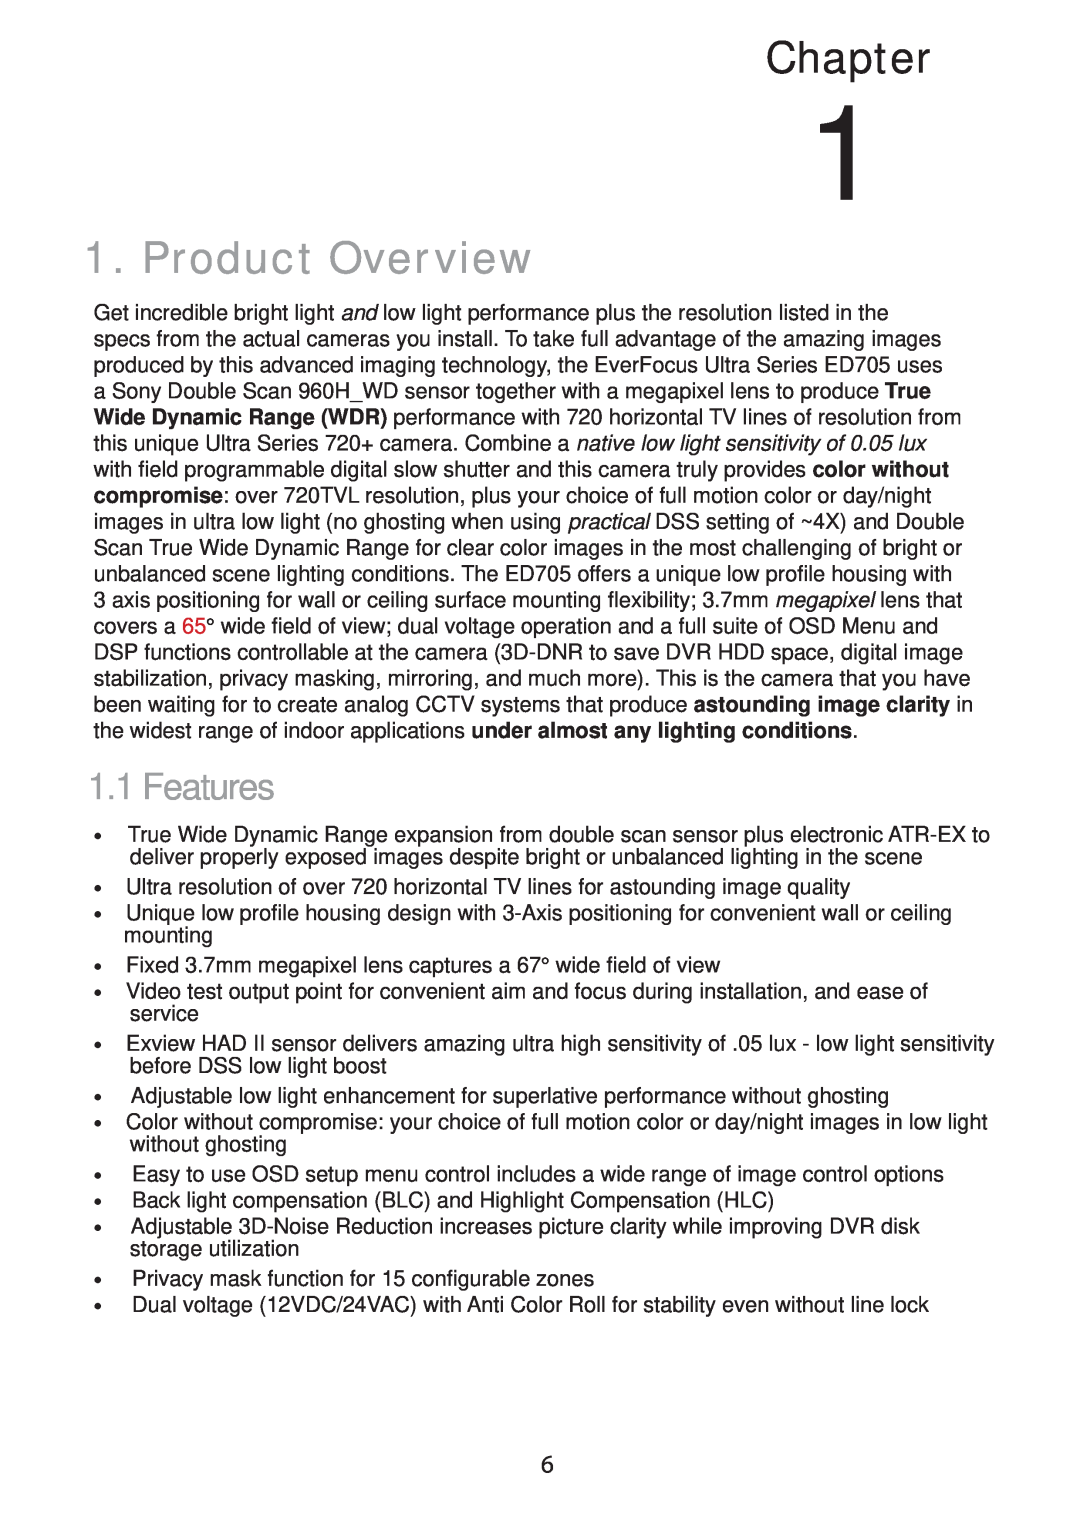 EverFocus EHD705, ED705 manual Chapter, Product Overview, Features 